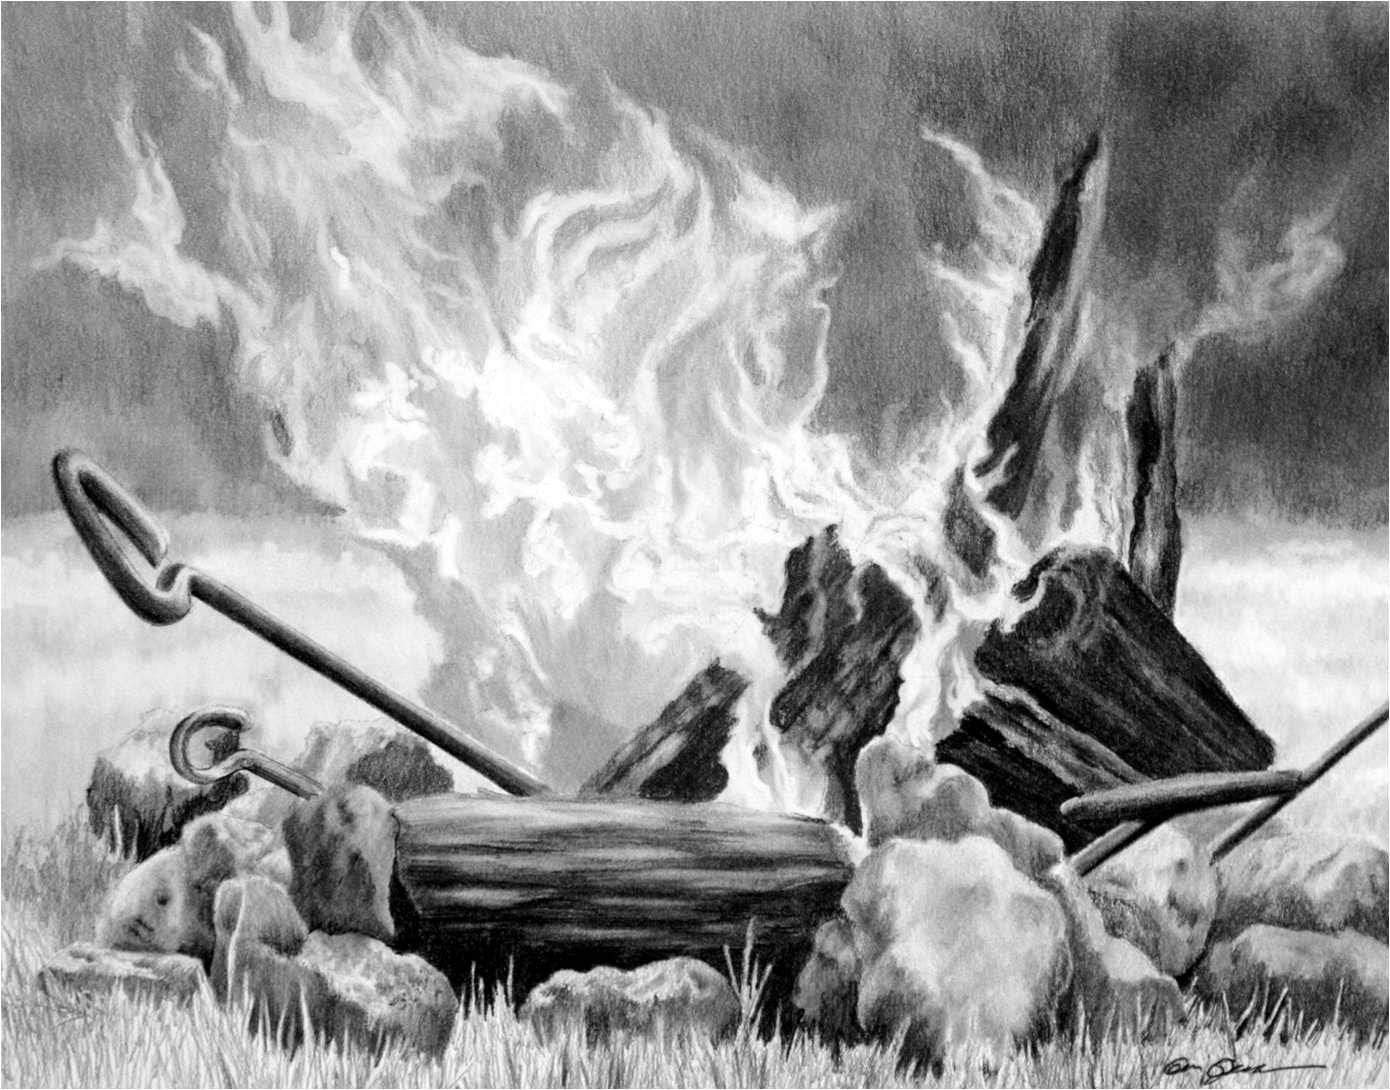 Fire Pencil Drawing At Paintingvalley Com Explore Collection Of Fire Pencil Drawing